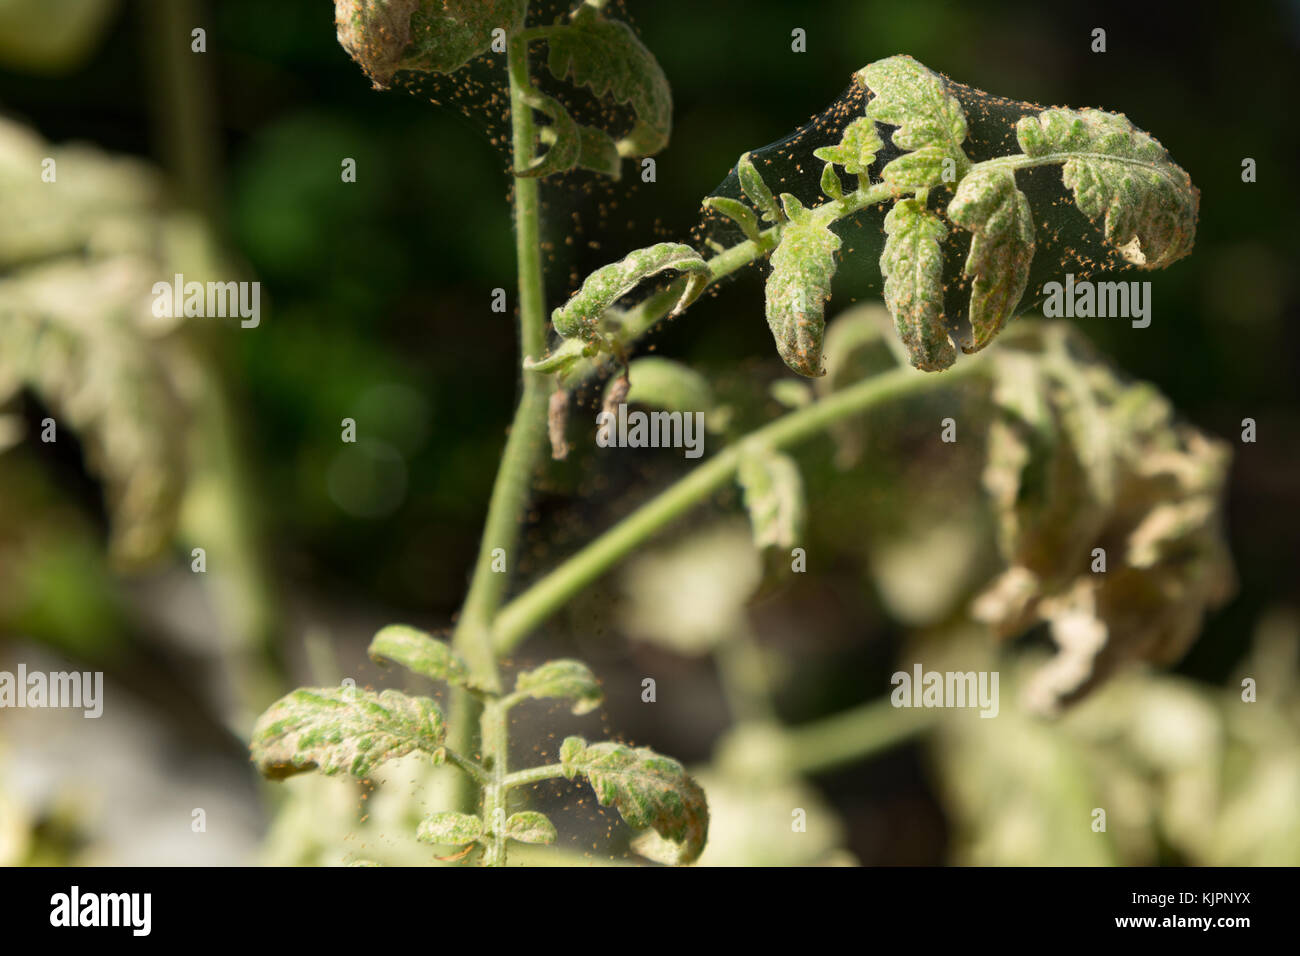 Asuncion, Paraguay. 28th Nov, 2017. Hot and dry weather conditions greatly favor spider mite rapid development and reproduction. Spider mites infestation and damage on a organic tomato plant is seen during sunny day, Asuncion, Paraguay. Credit: Andre M. Chang/ARDUOPRESS/Alamy Live News Stock Photo